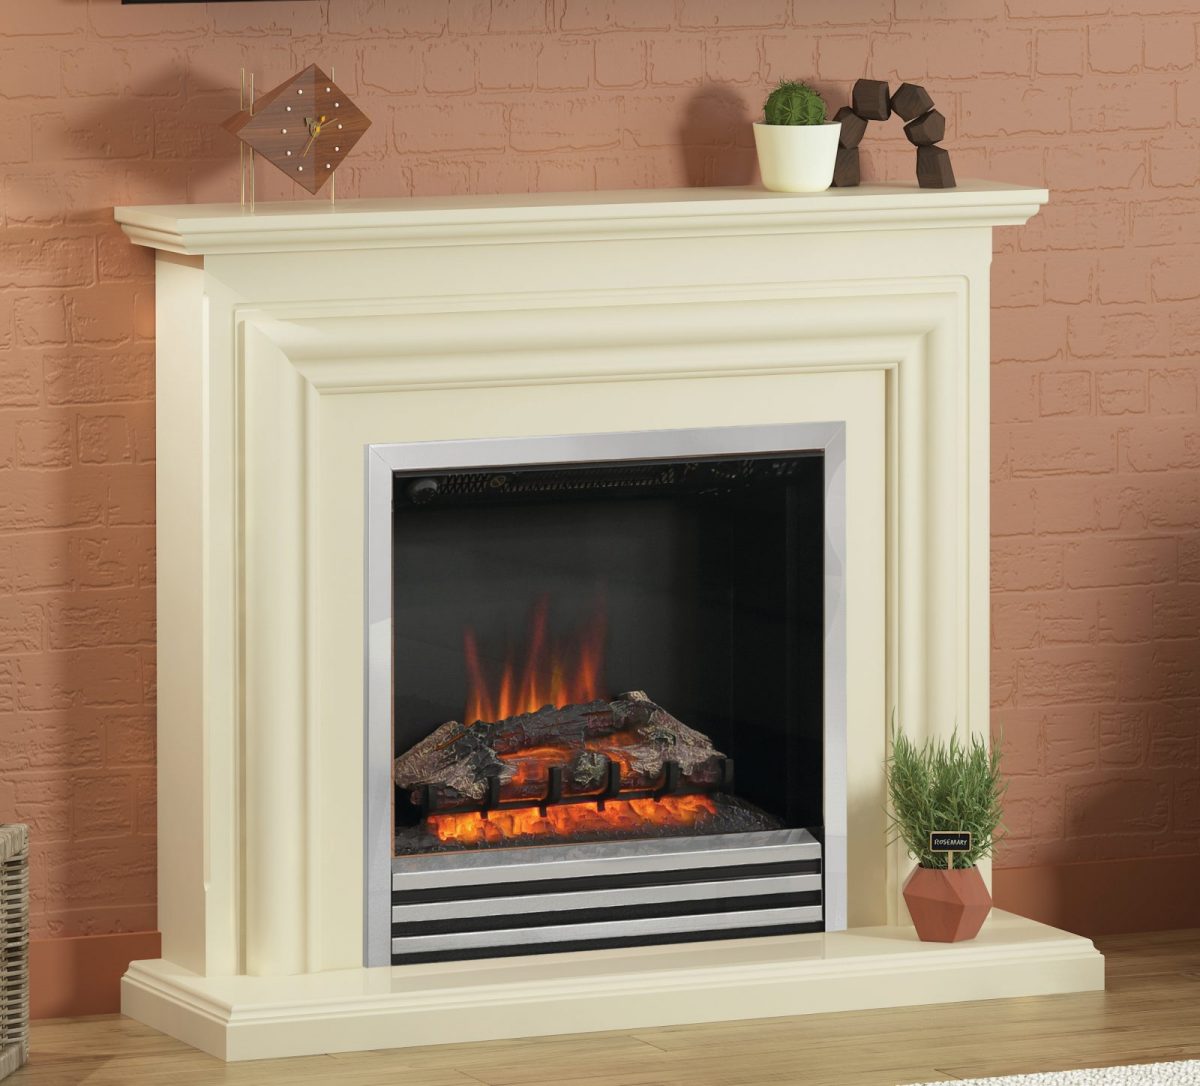 44″ Carina Fireplace in Ivory finish with Chrome finish Electric Fire